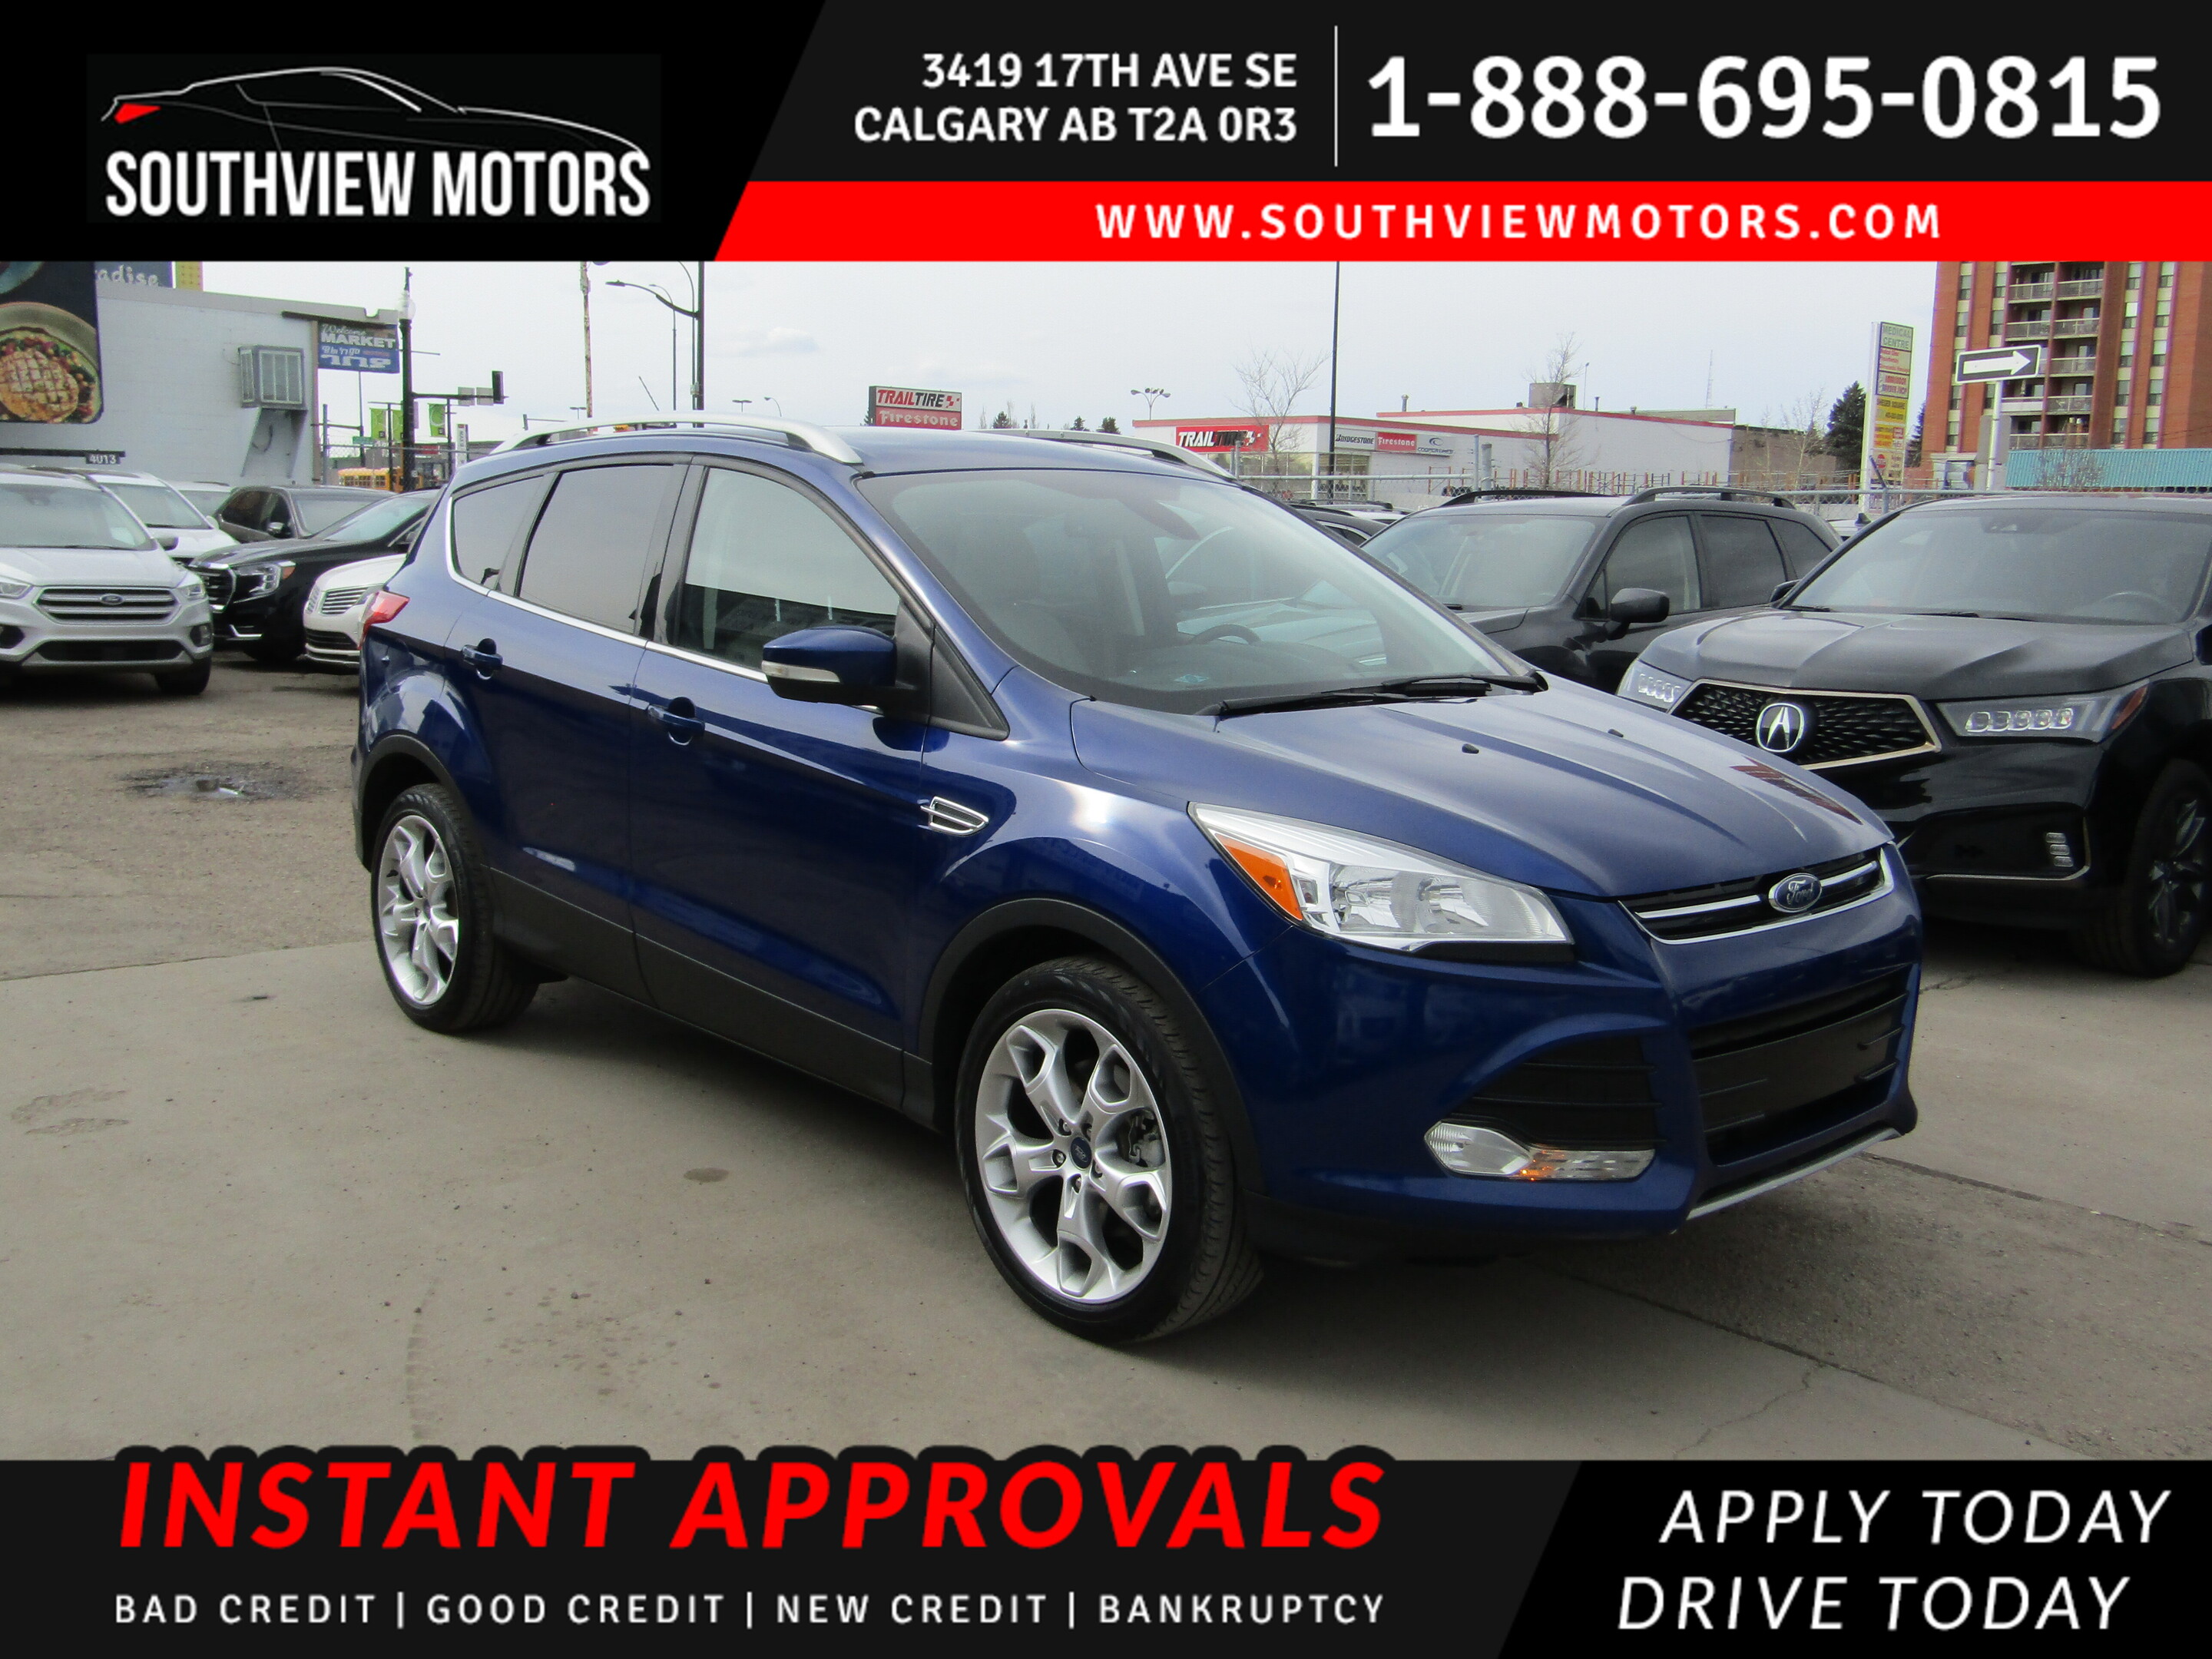 2015 Ford Escape TITANIUM 4WD 2.0L NAV/CAM/PANOROOF/LEATHER/LOW KM